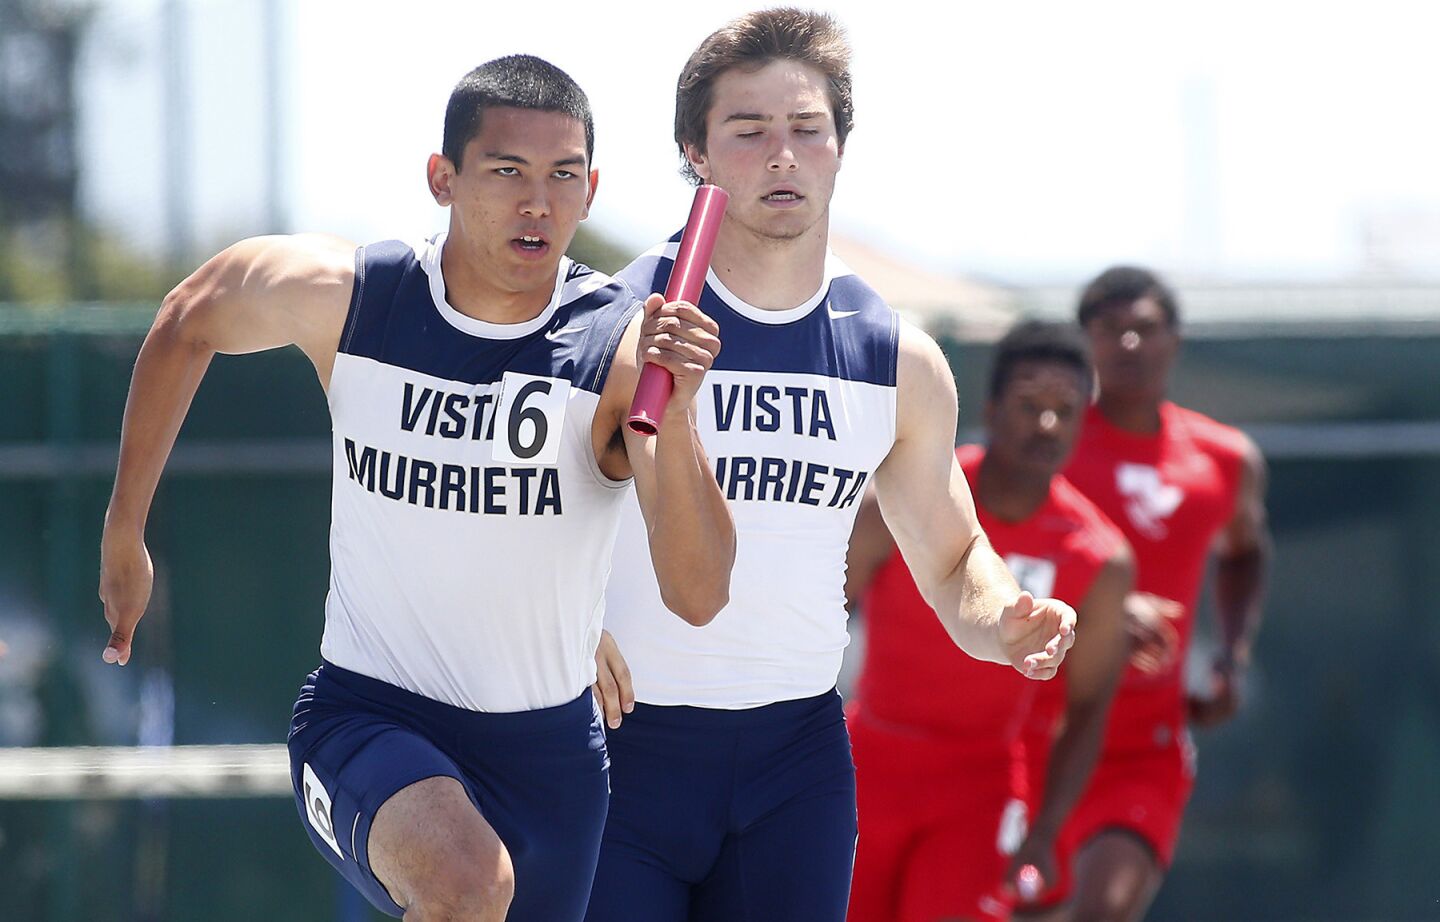 Vista Murietta's Jordan Testerman takes the baton from teammate Cole Dubbots to anchor their victory in the Divison 1 boys' 4x100-meter relay during the CIF Southern Section finals at Cerritos College.